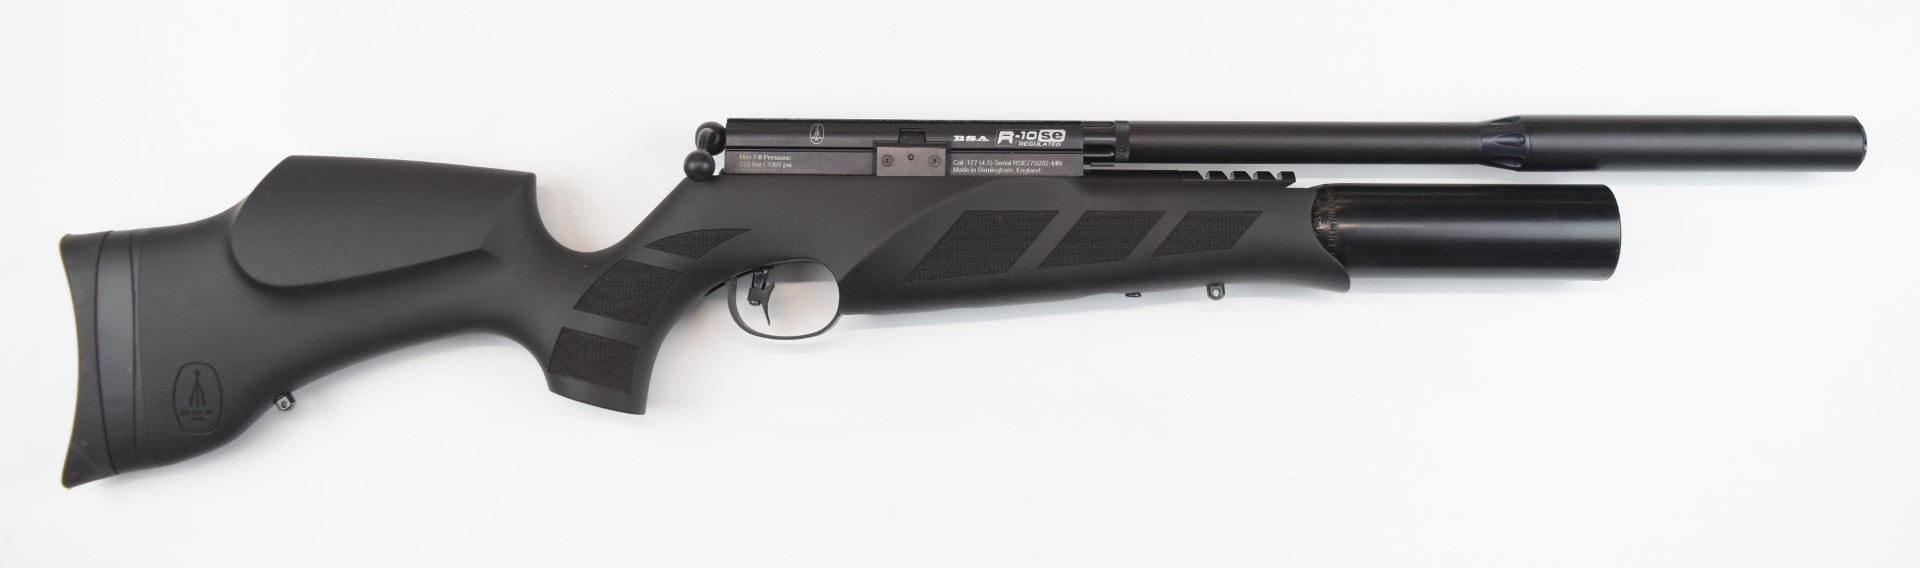 BSA R-10 SE Regulated .177 PCP air rifle with textured semi-pistol grip and forend, raised cheek - Image 2 of 22